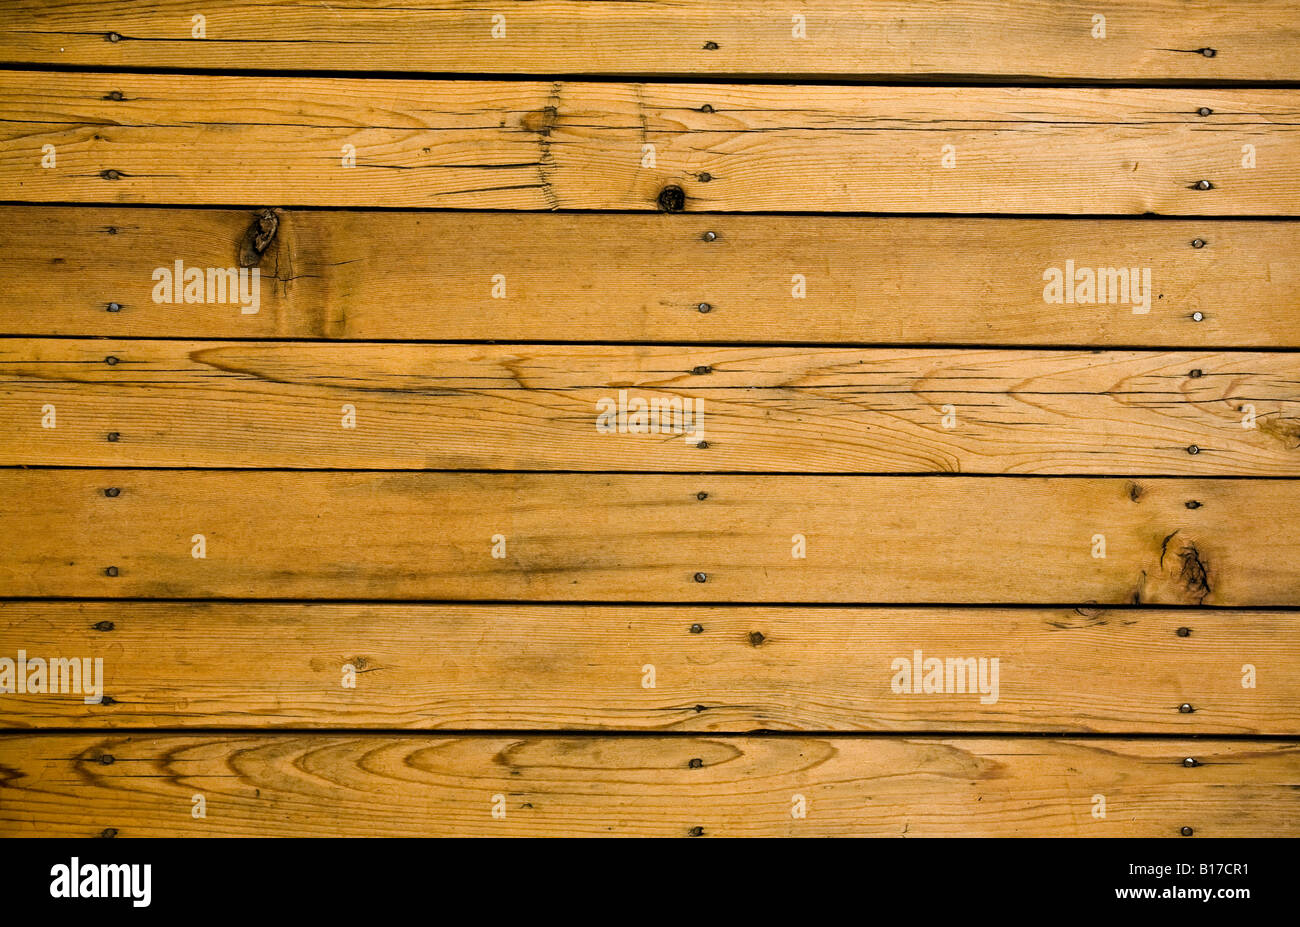 Wooden boards Stock Photo